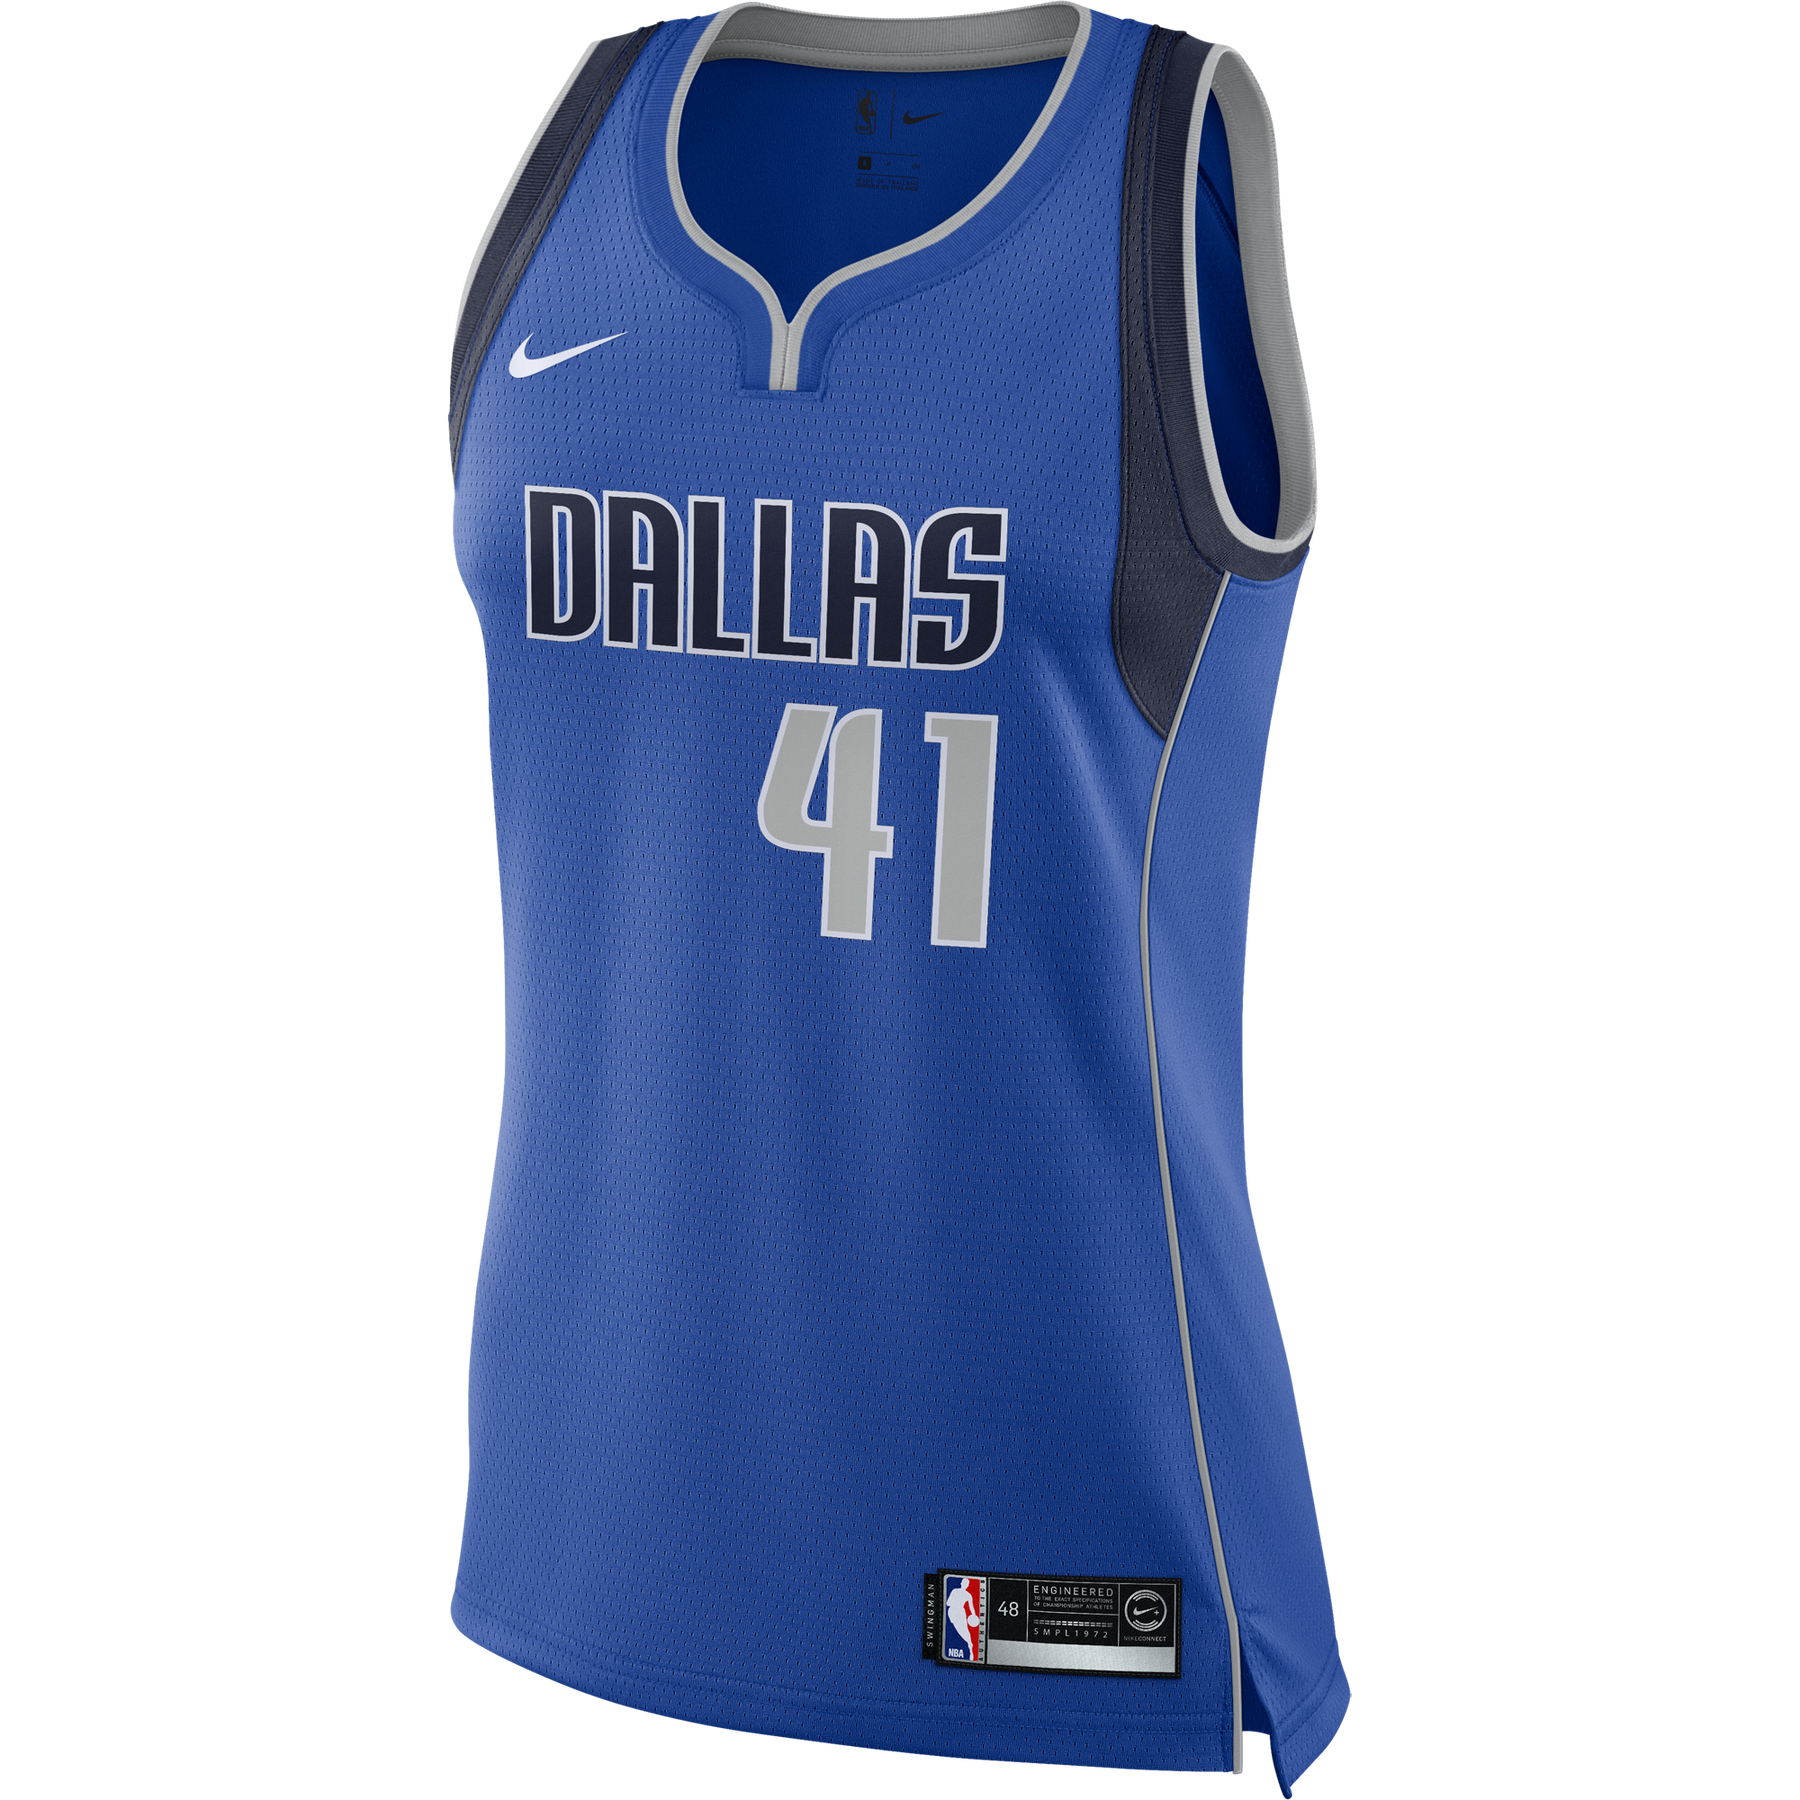 nikeconnect jersey